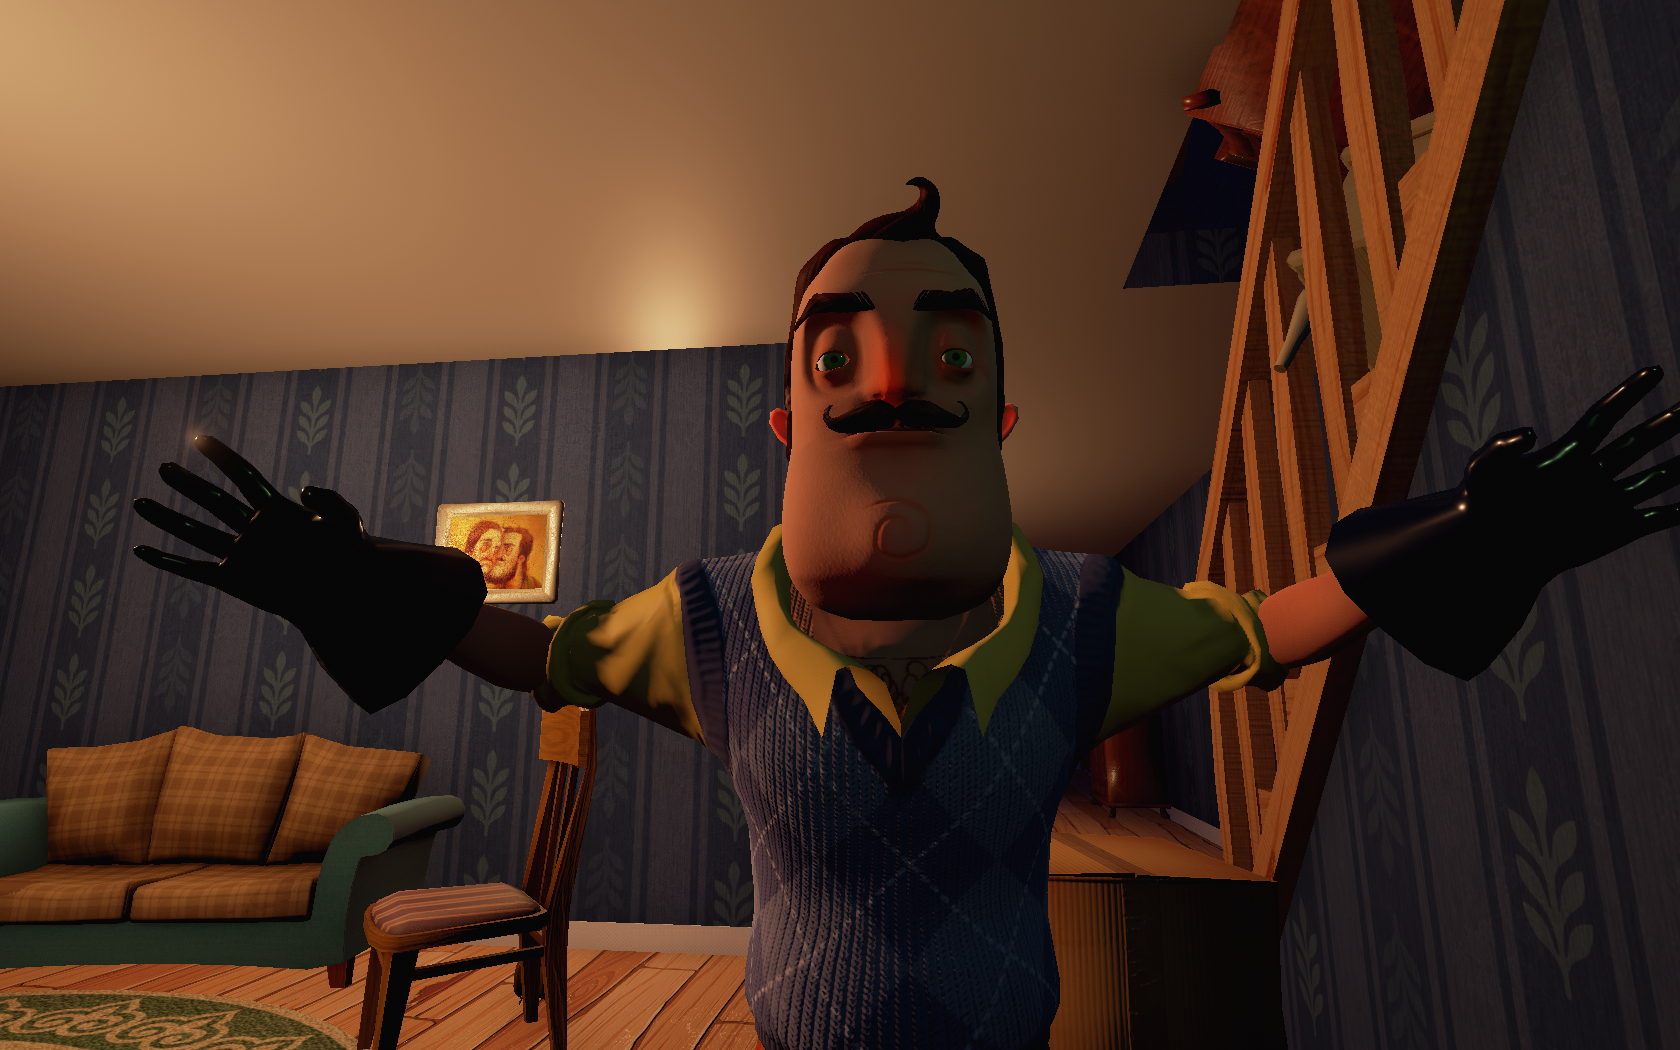 chase and dad play hello neighbor